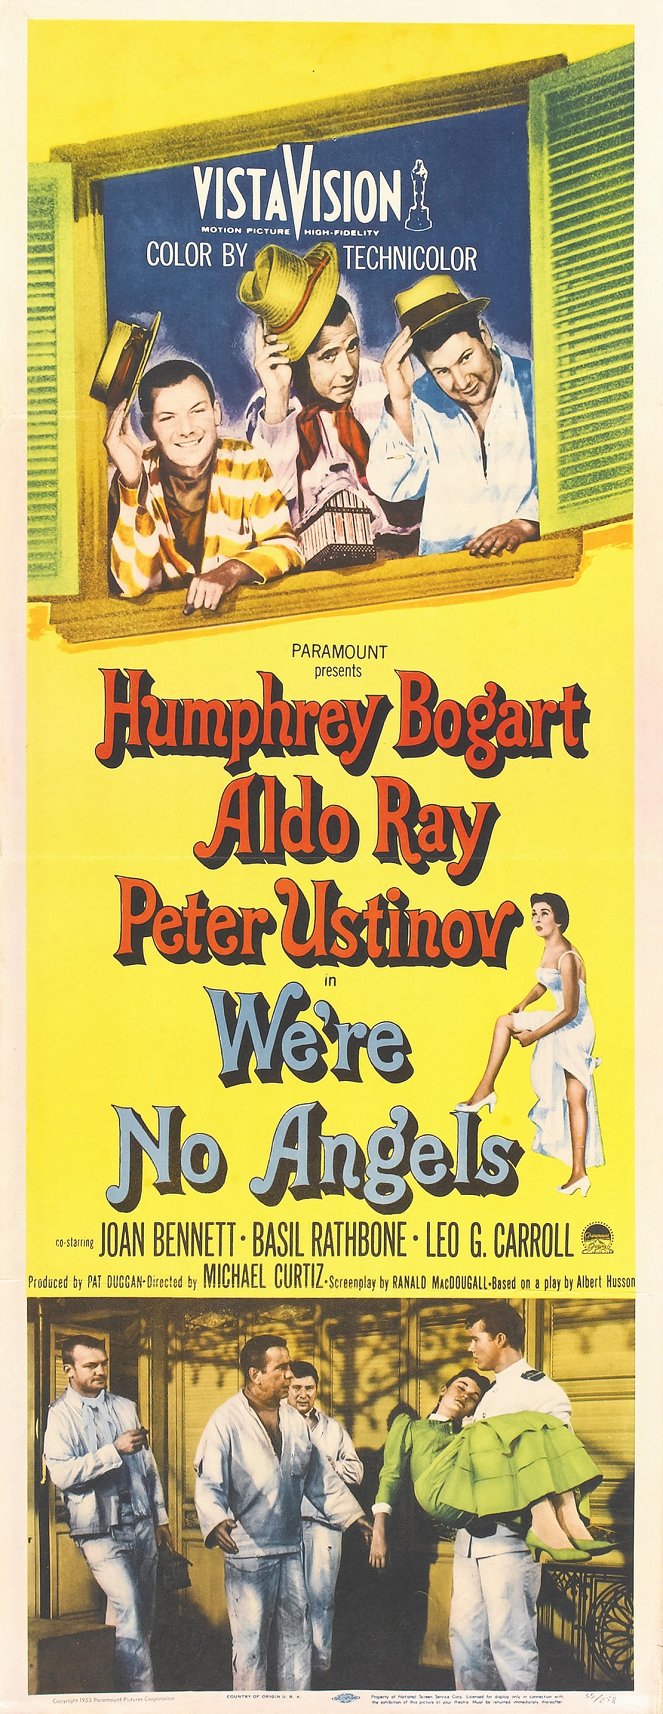 We're No Angels - Posters